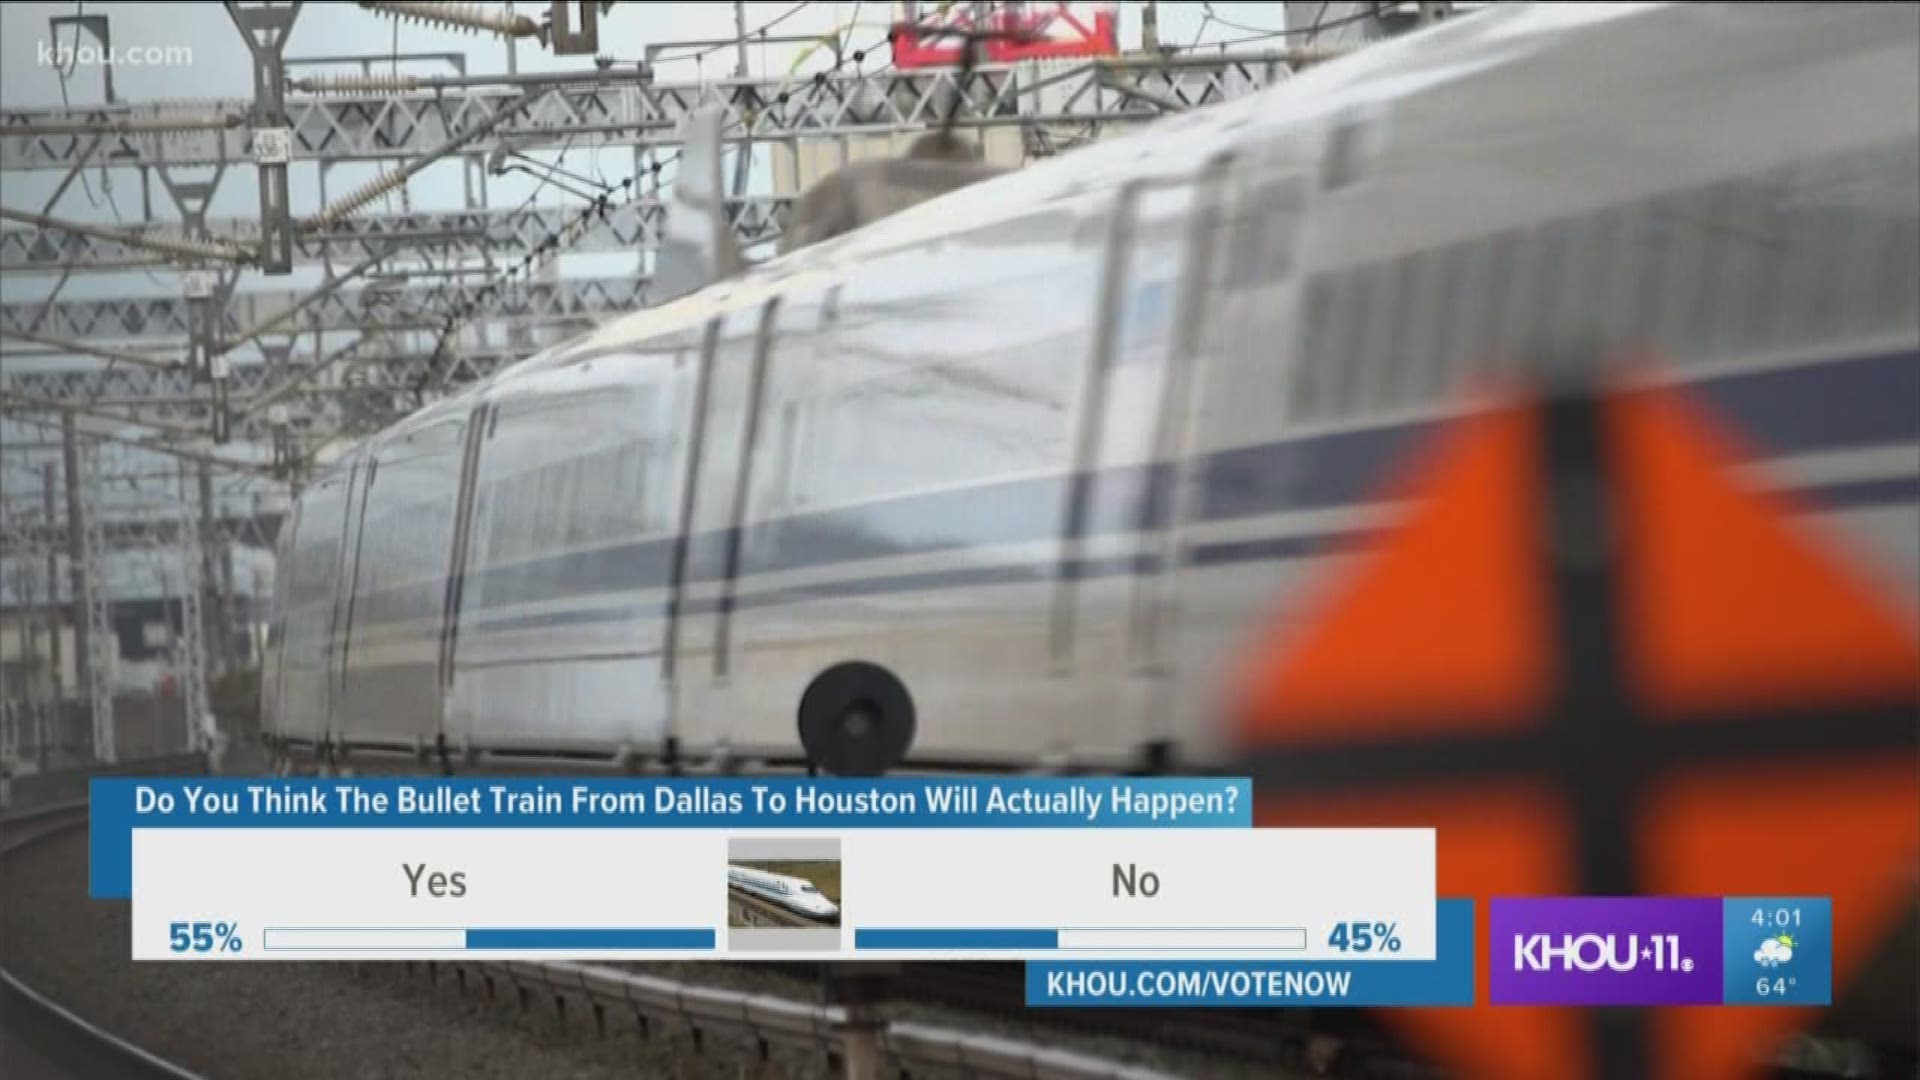 A recent ruling in Leon County, Texas could stop the bullet train project in its tracks.